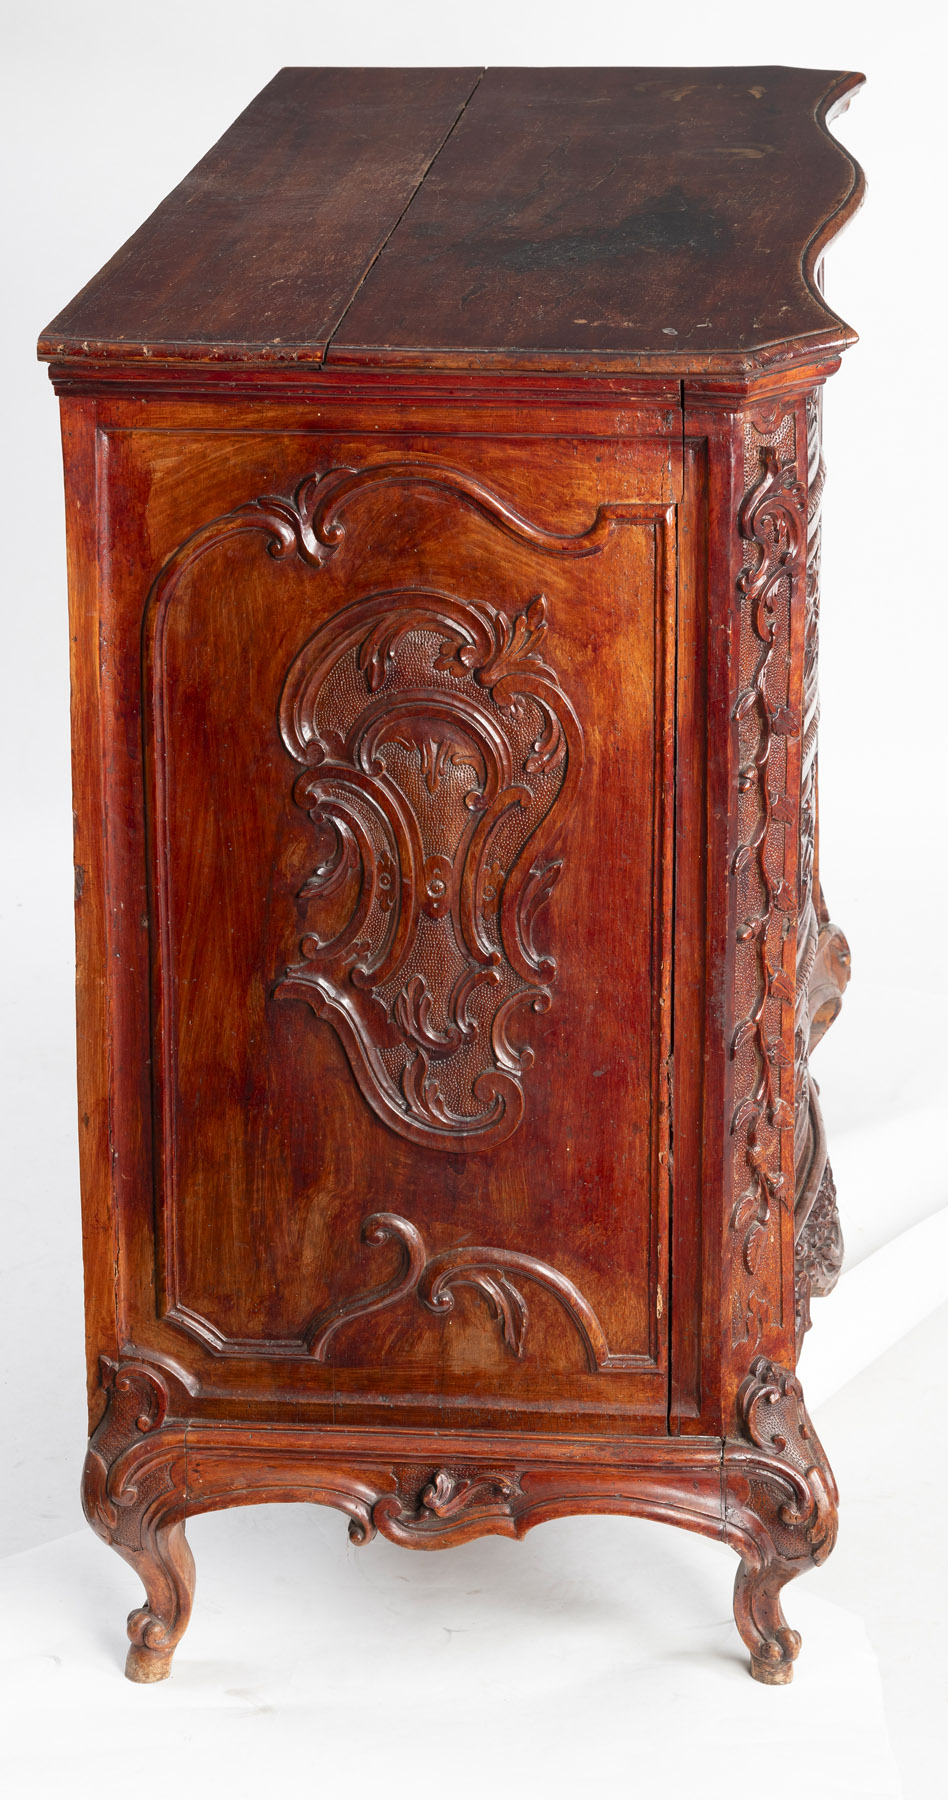 A LARGE BRASS MOUNTED CARVED WALNUT ROCOCO COMMODE - Image 6 of 7